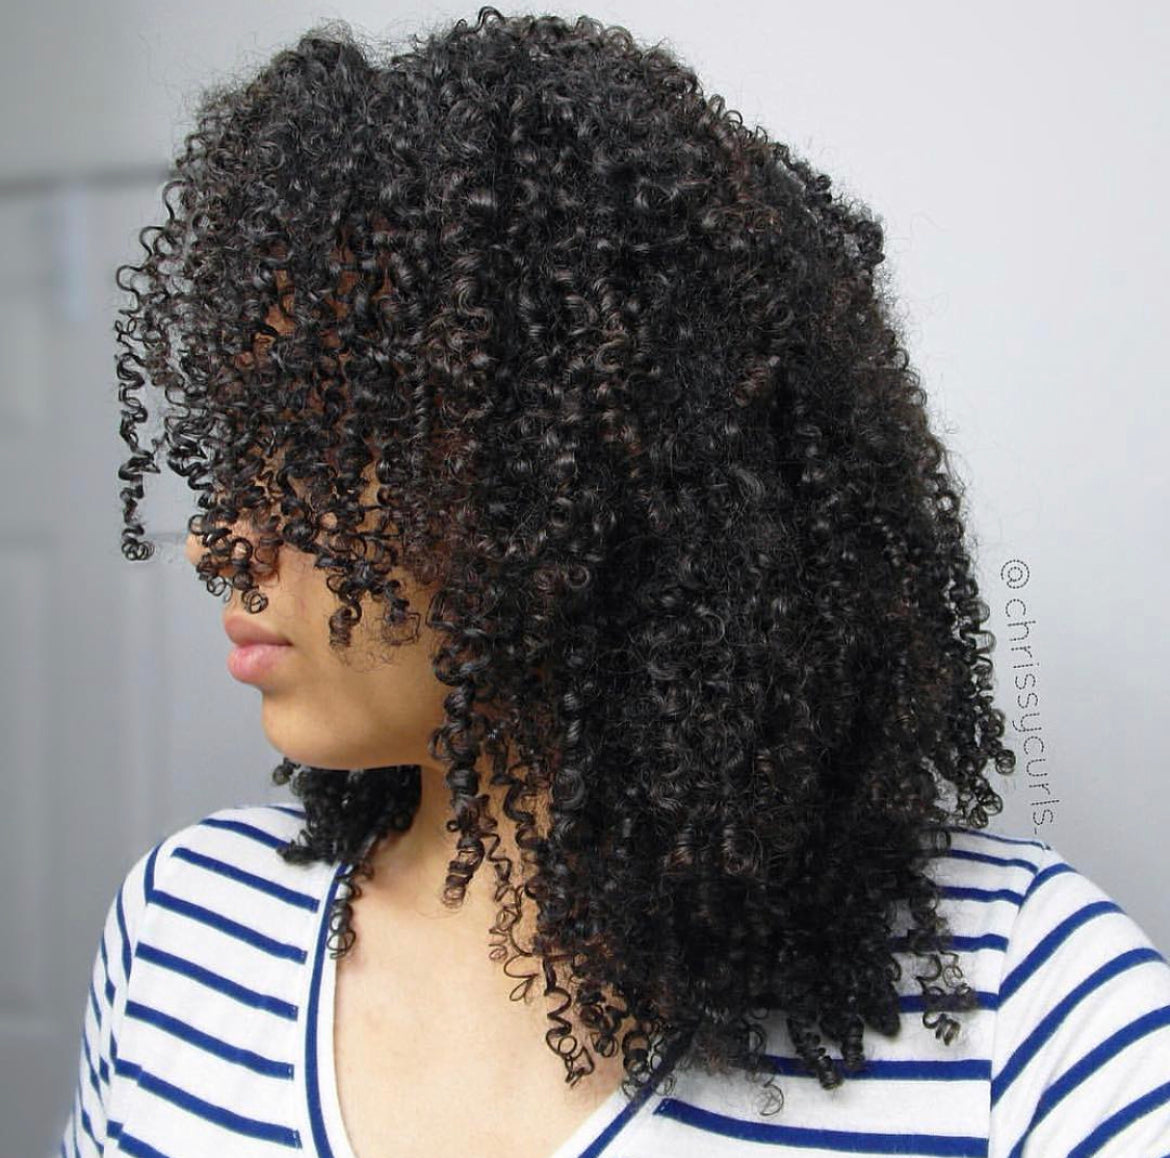 curly hair products